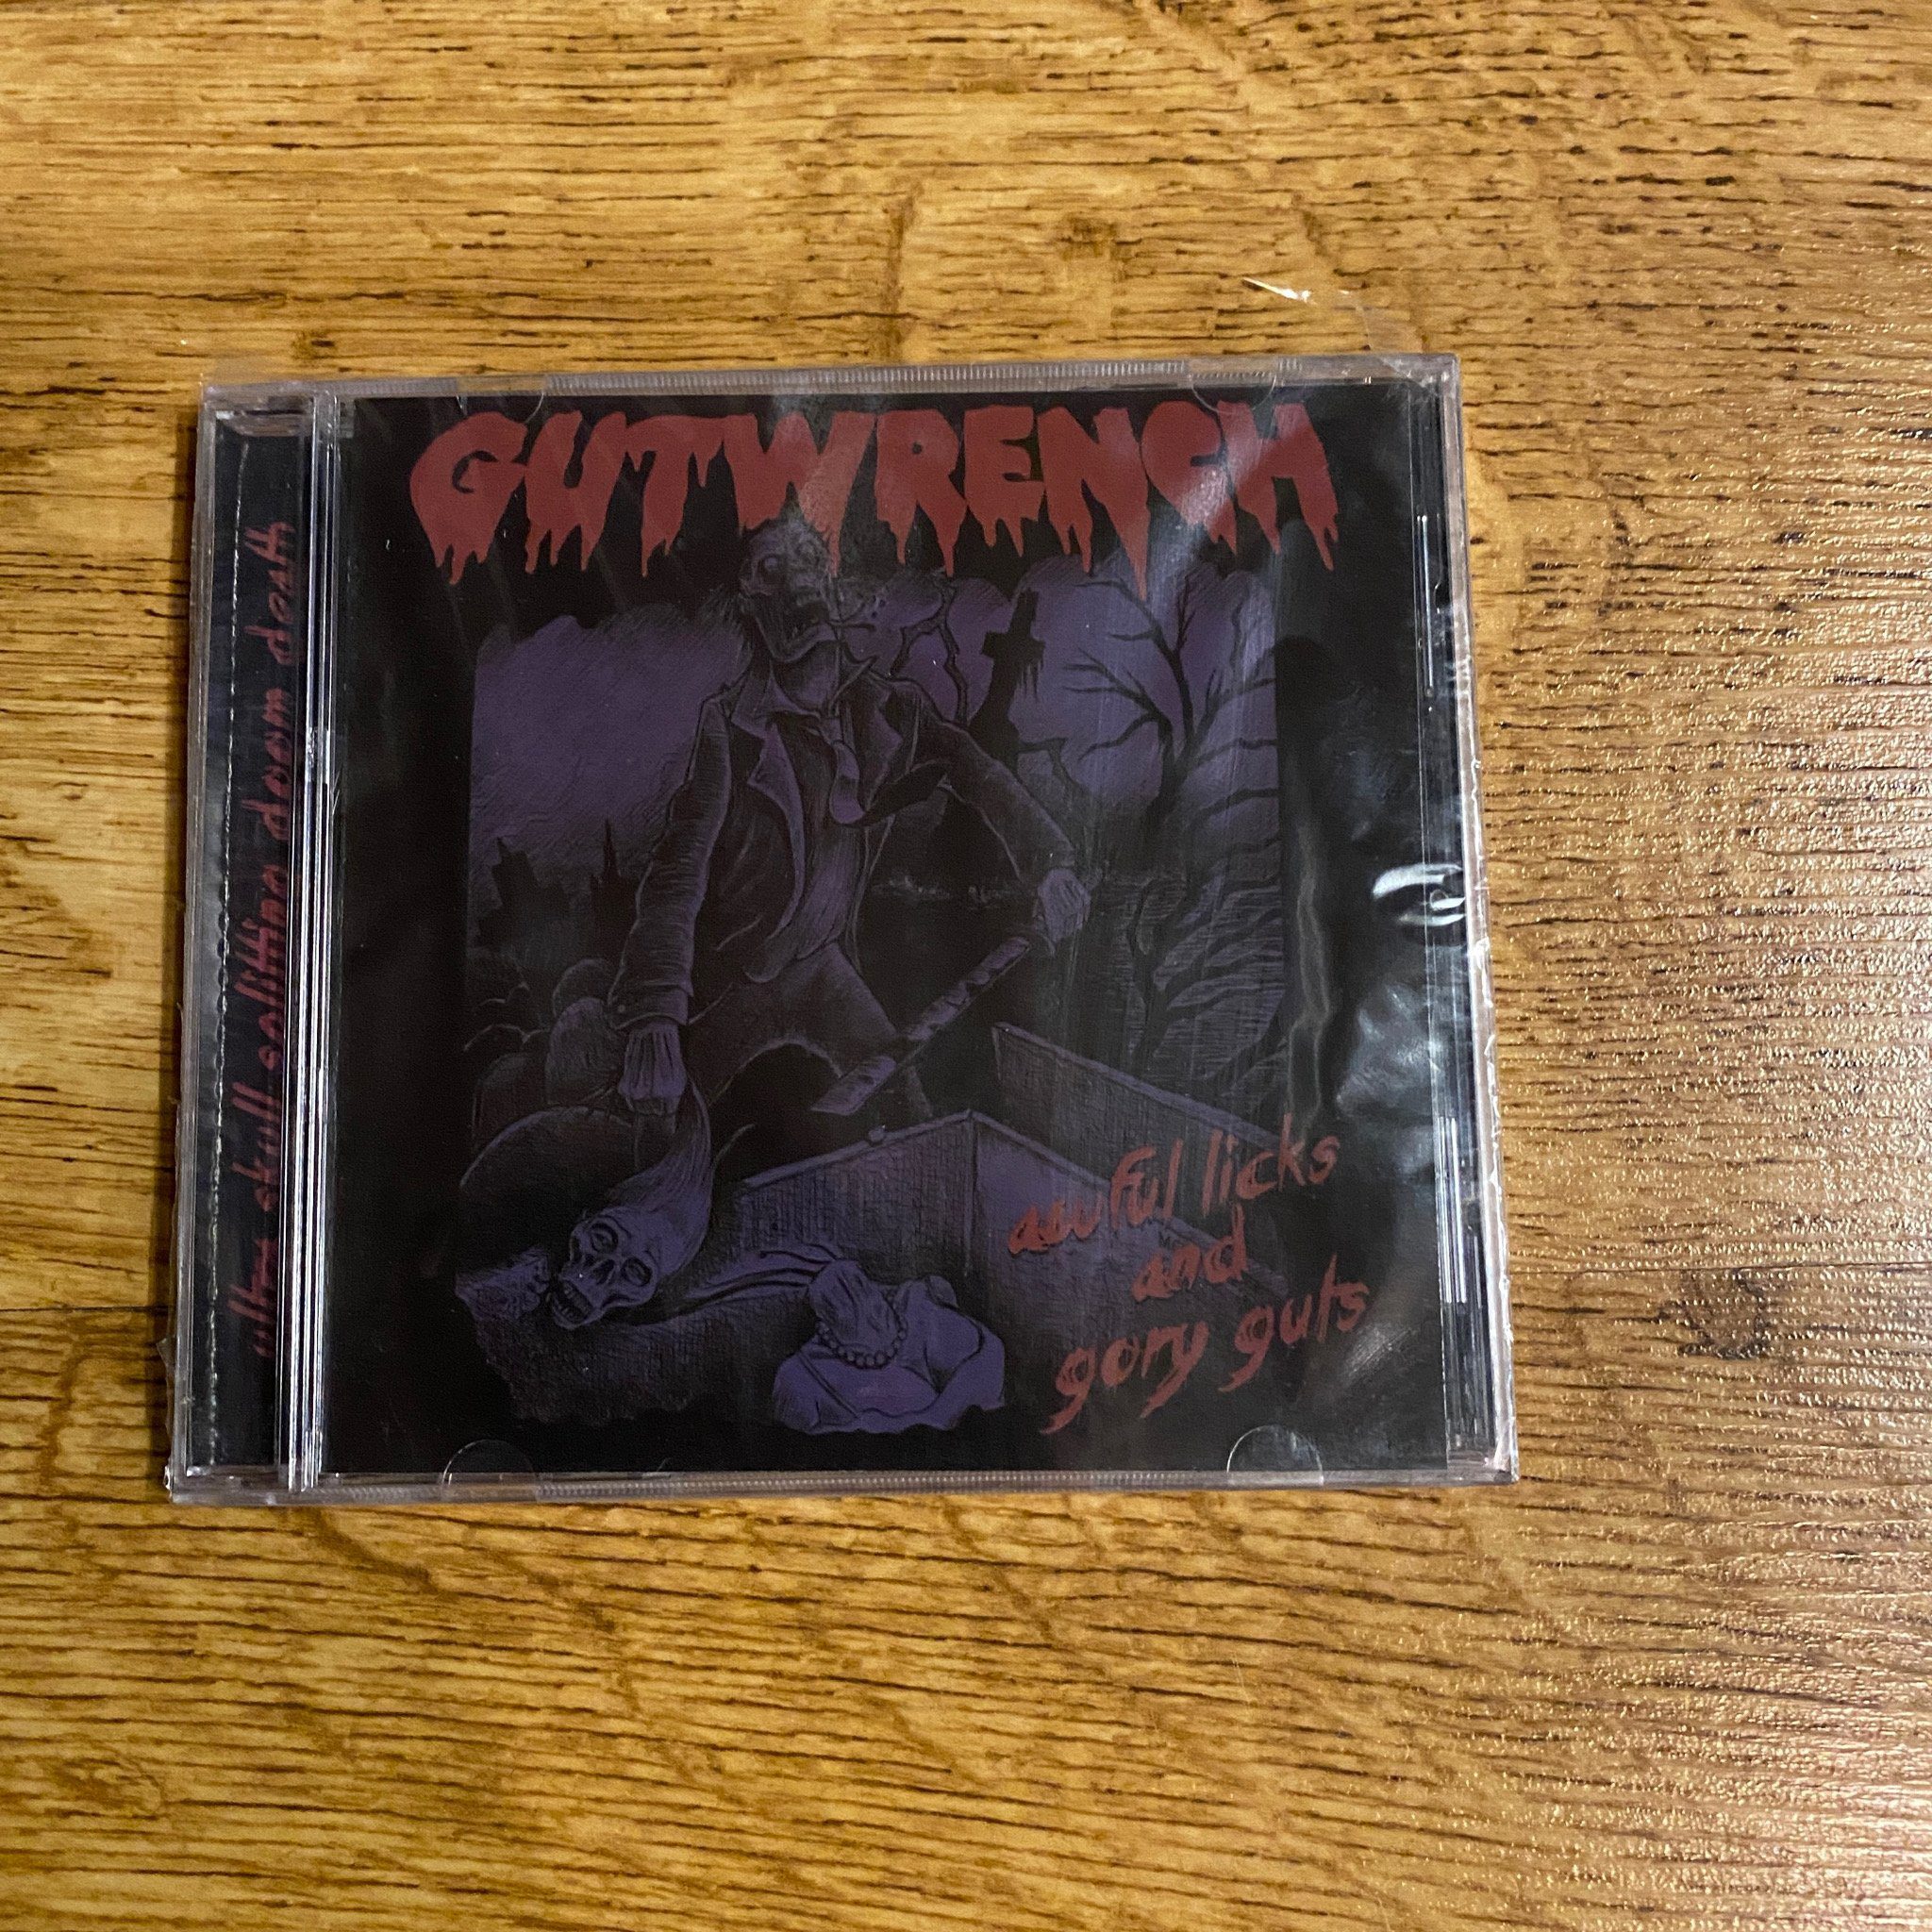 Photo of the Gutwrench - "Awful Licks and Gory Guts" CD